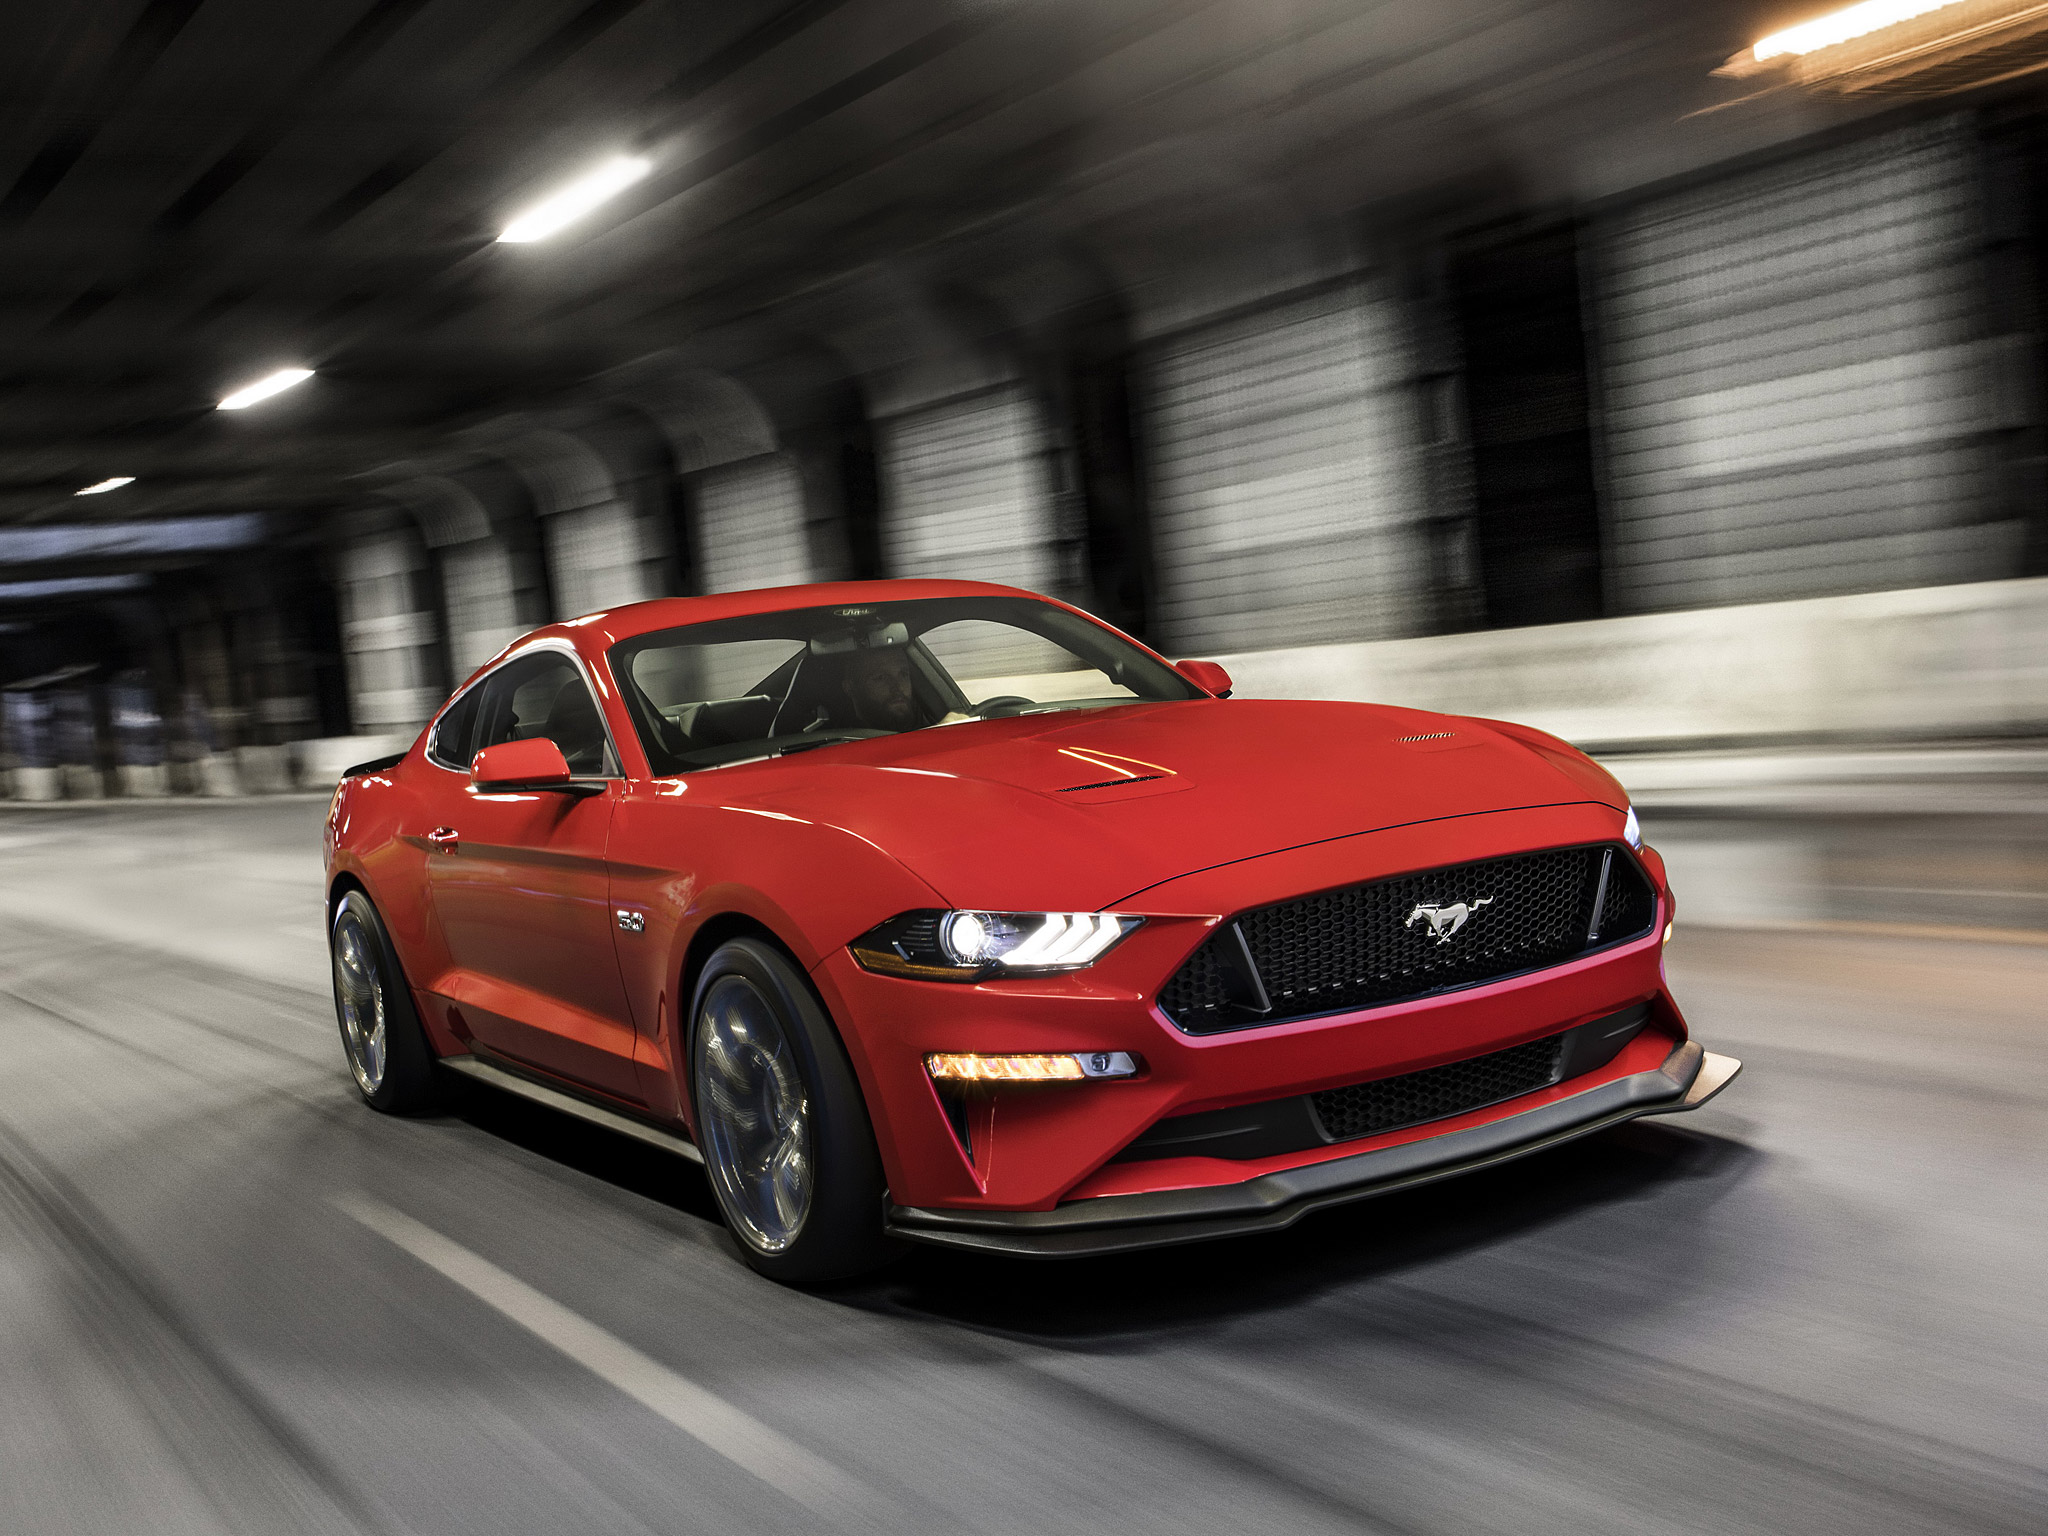  2018 Ford Mustang GT Performance Pack Level 2 Wallpaper.